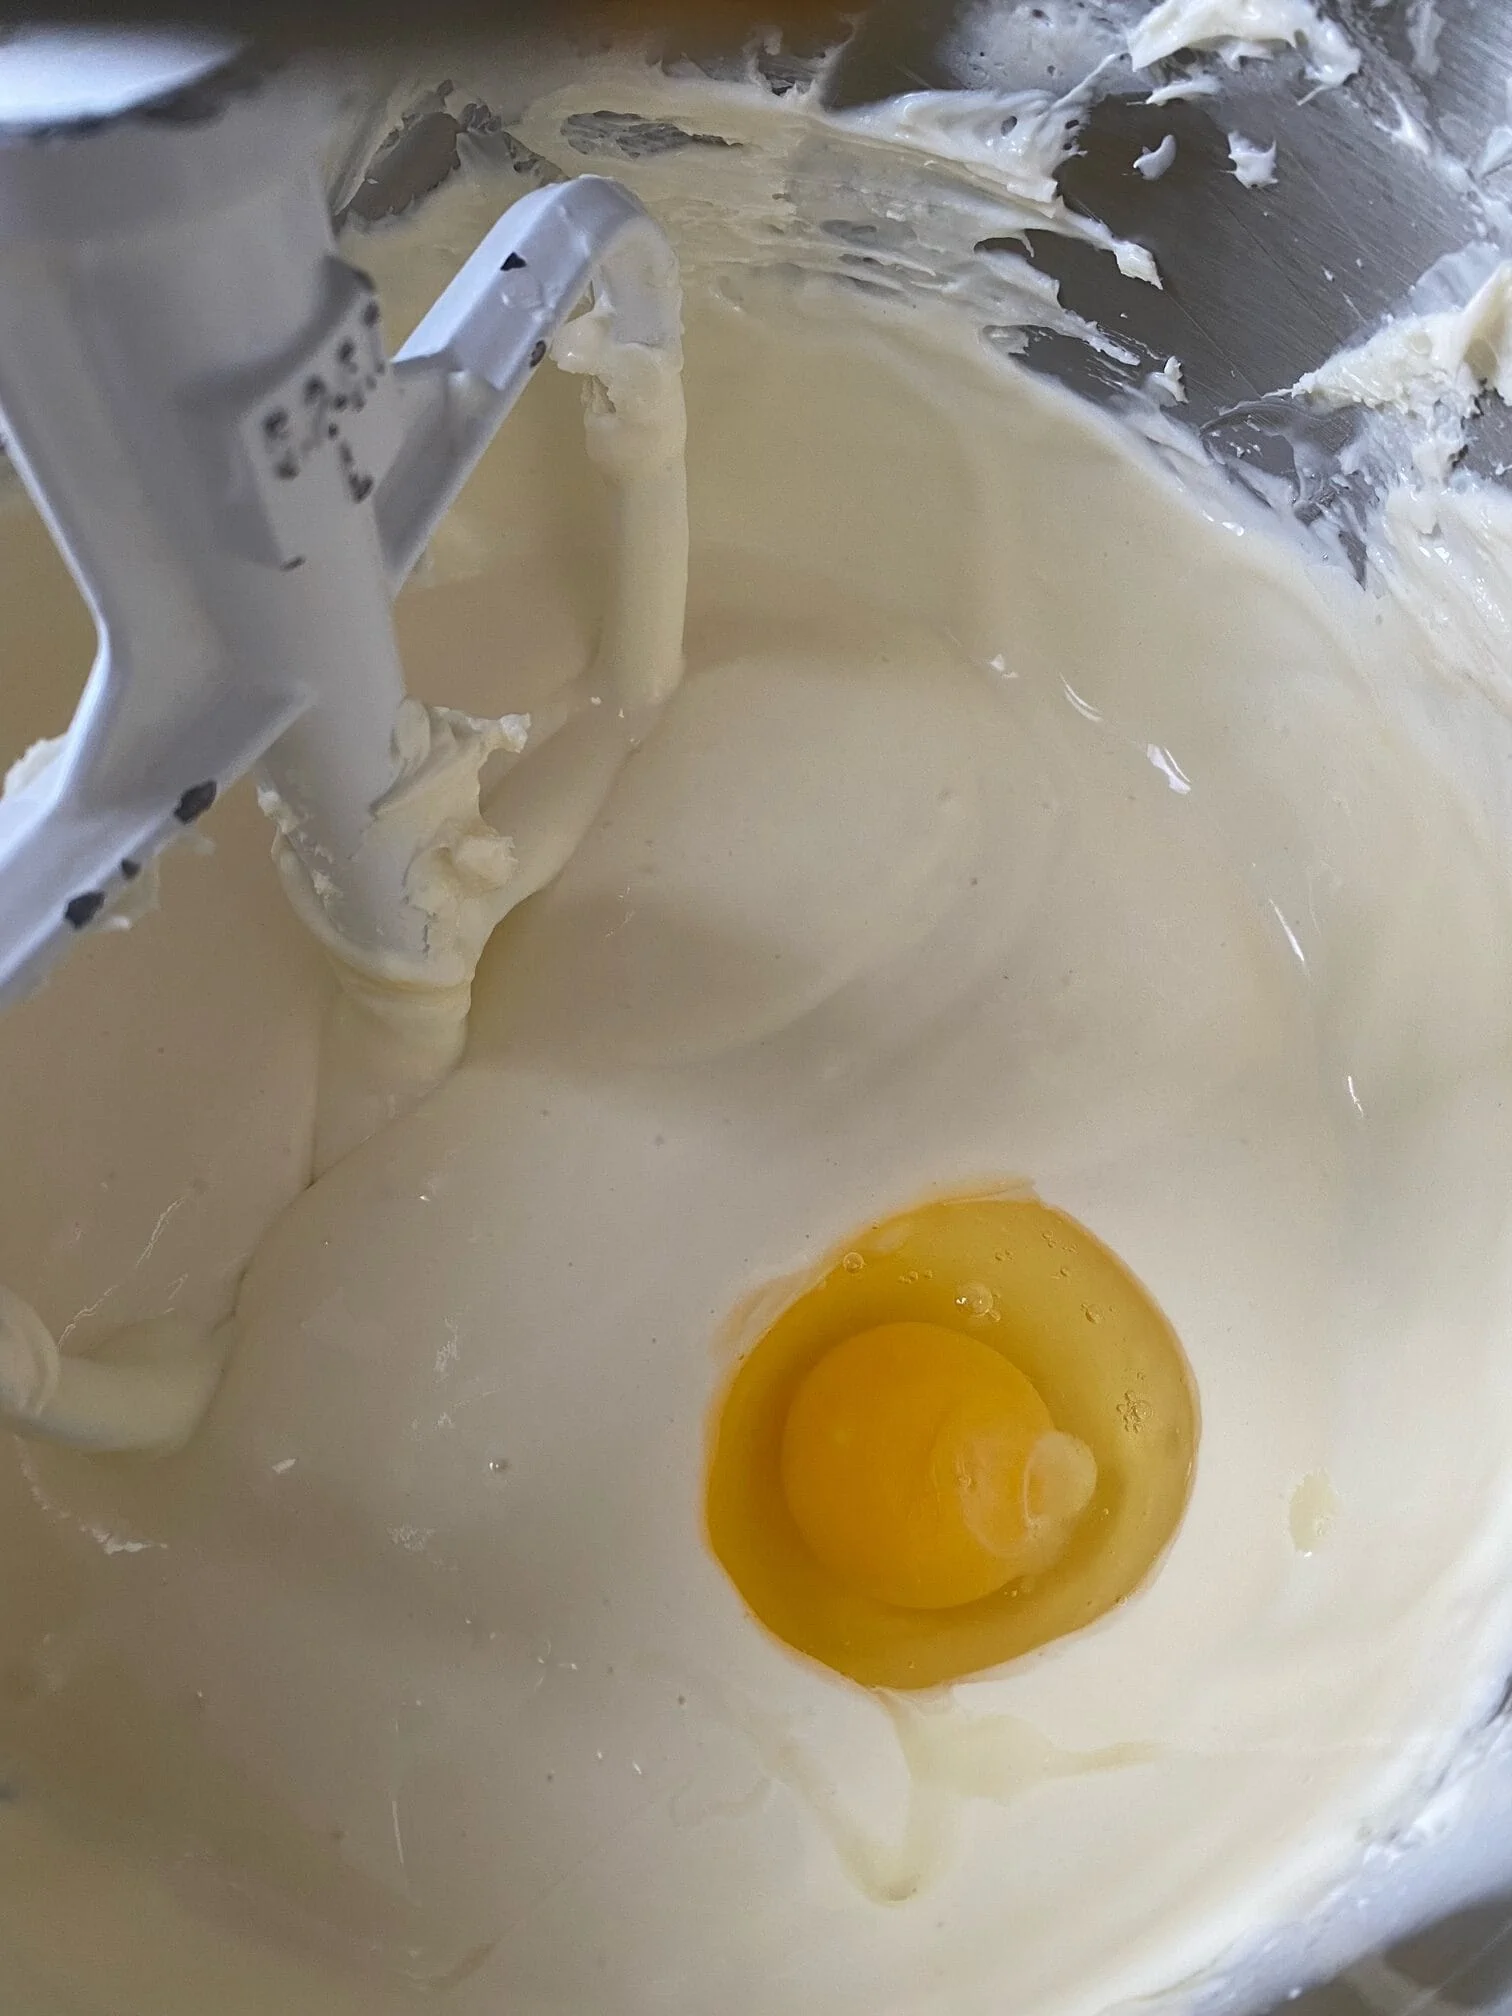 Cheesecake batter in a mixing bowl, with an egg sitting on top.